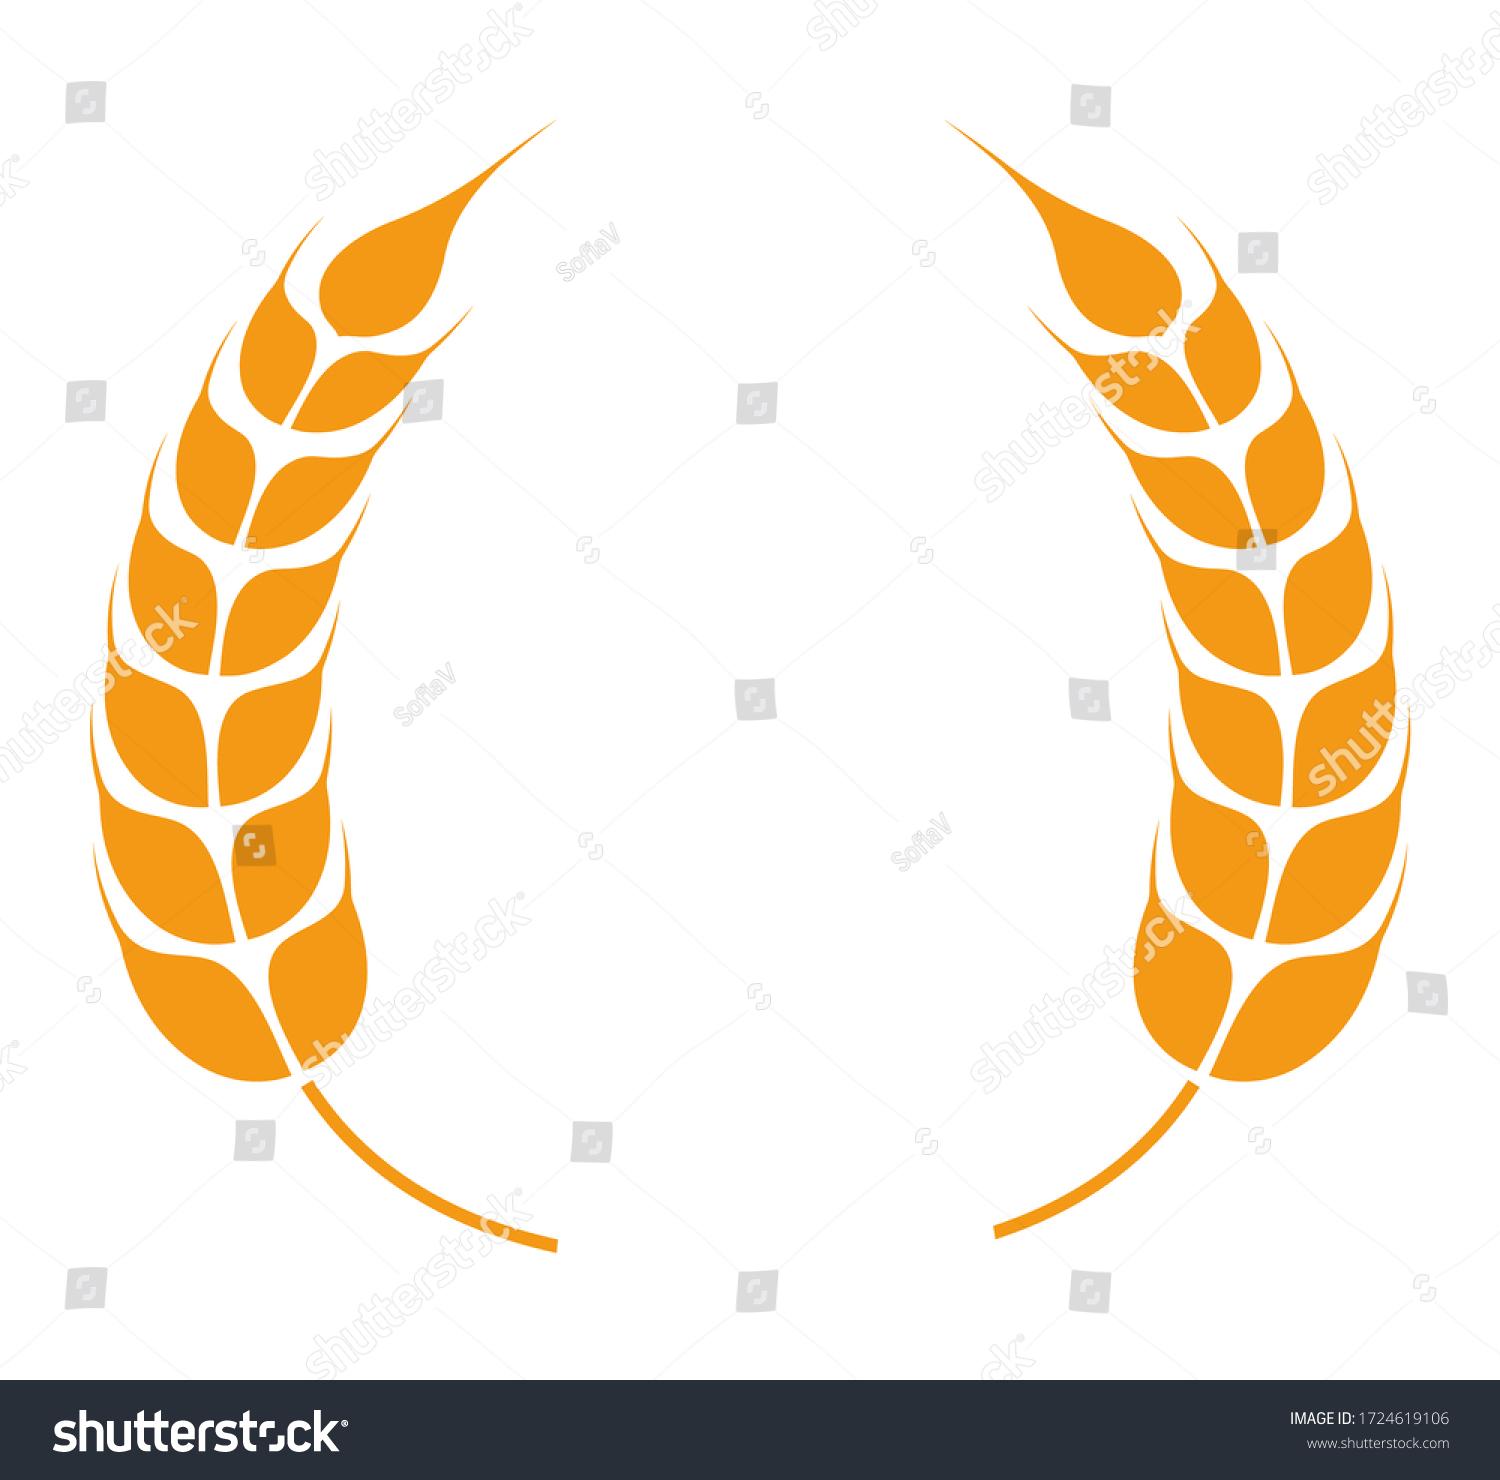 SVG of Wreath made of wheat or barley spikelets, rounded shape isolated. Heraldic form with leaves, bakery sign or logotype. Harvesting season in autumn, circular foliage of ripe crop, vector in flat style svg